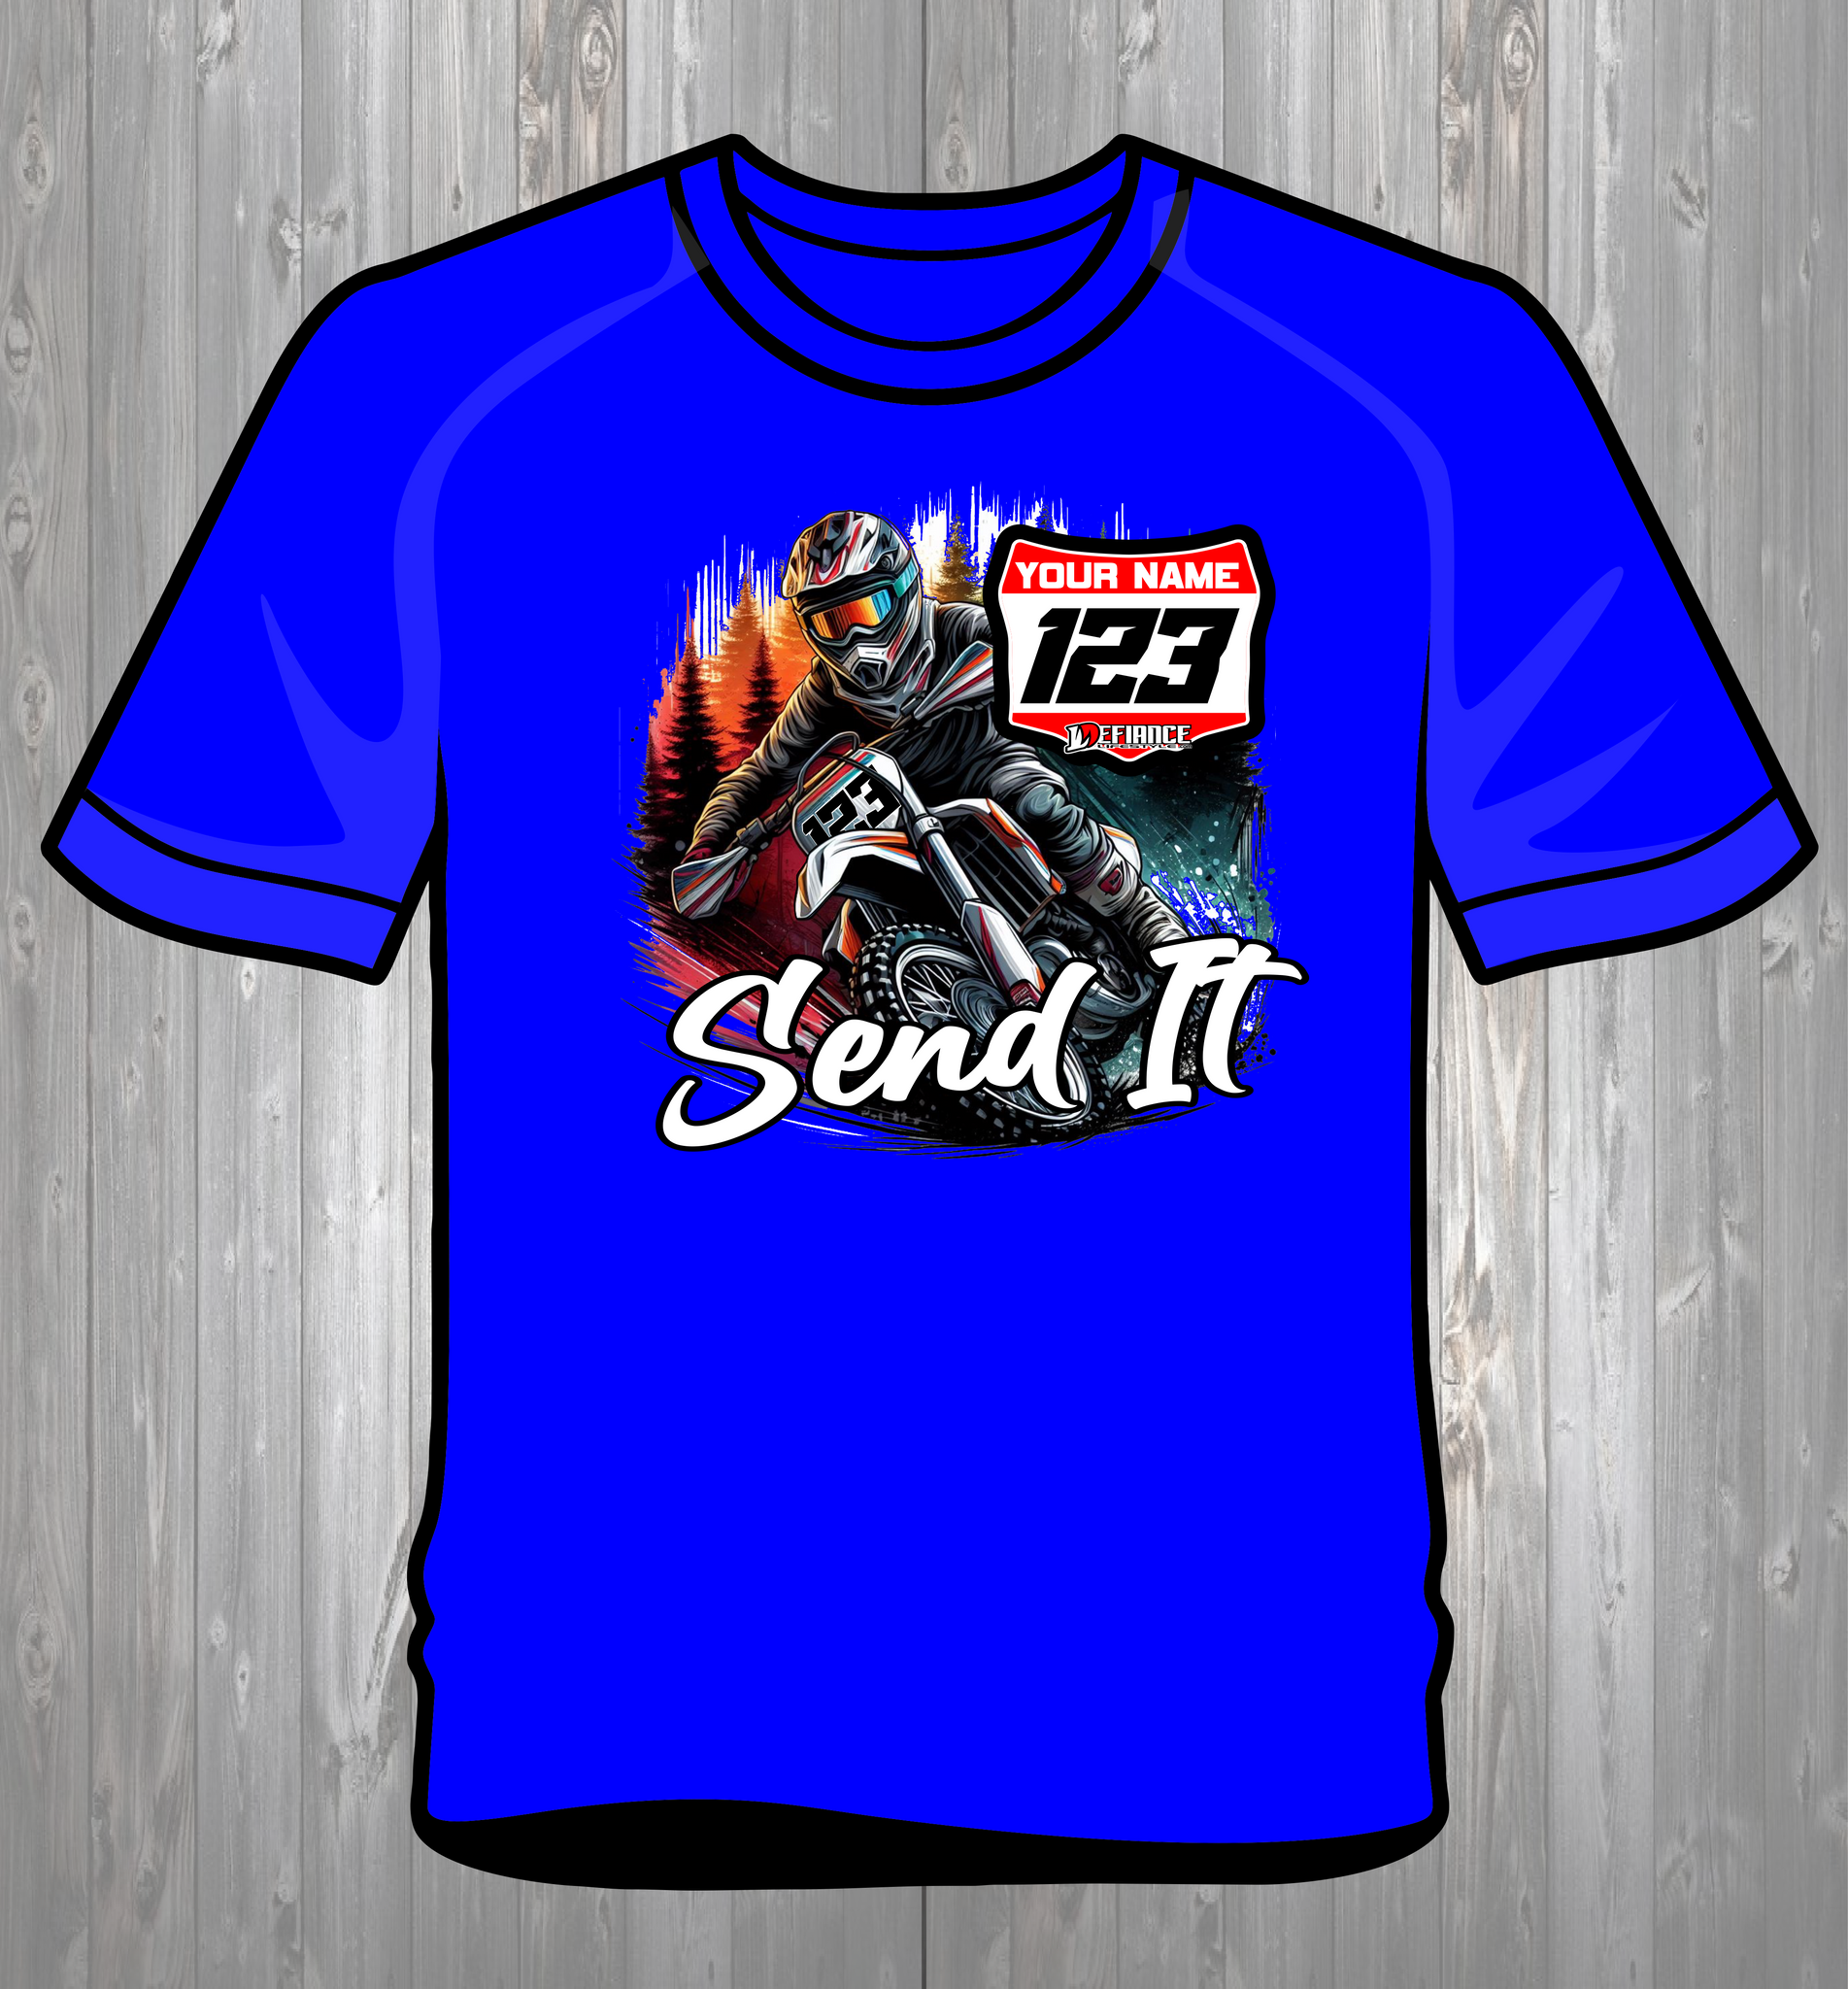 Personalized Race T-Shirt - Send it- Attack Collection